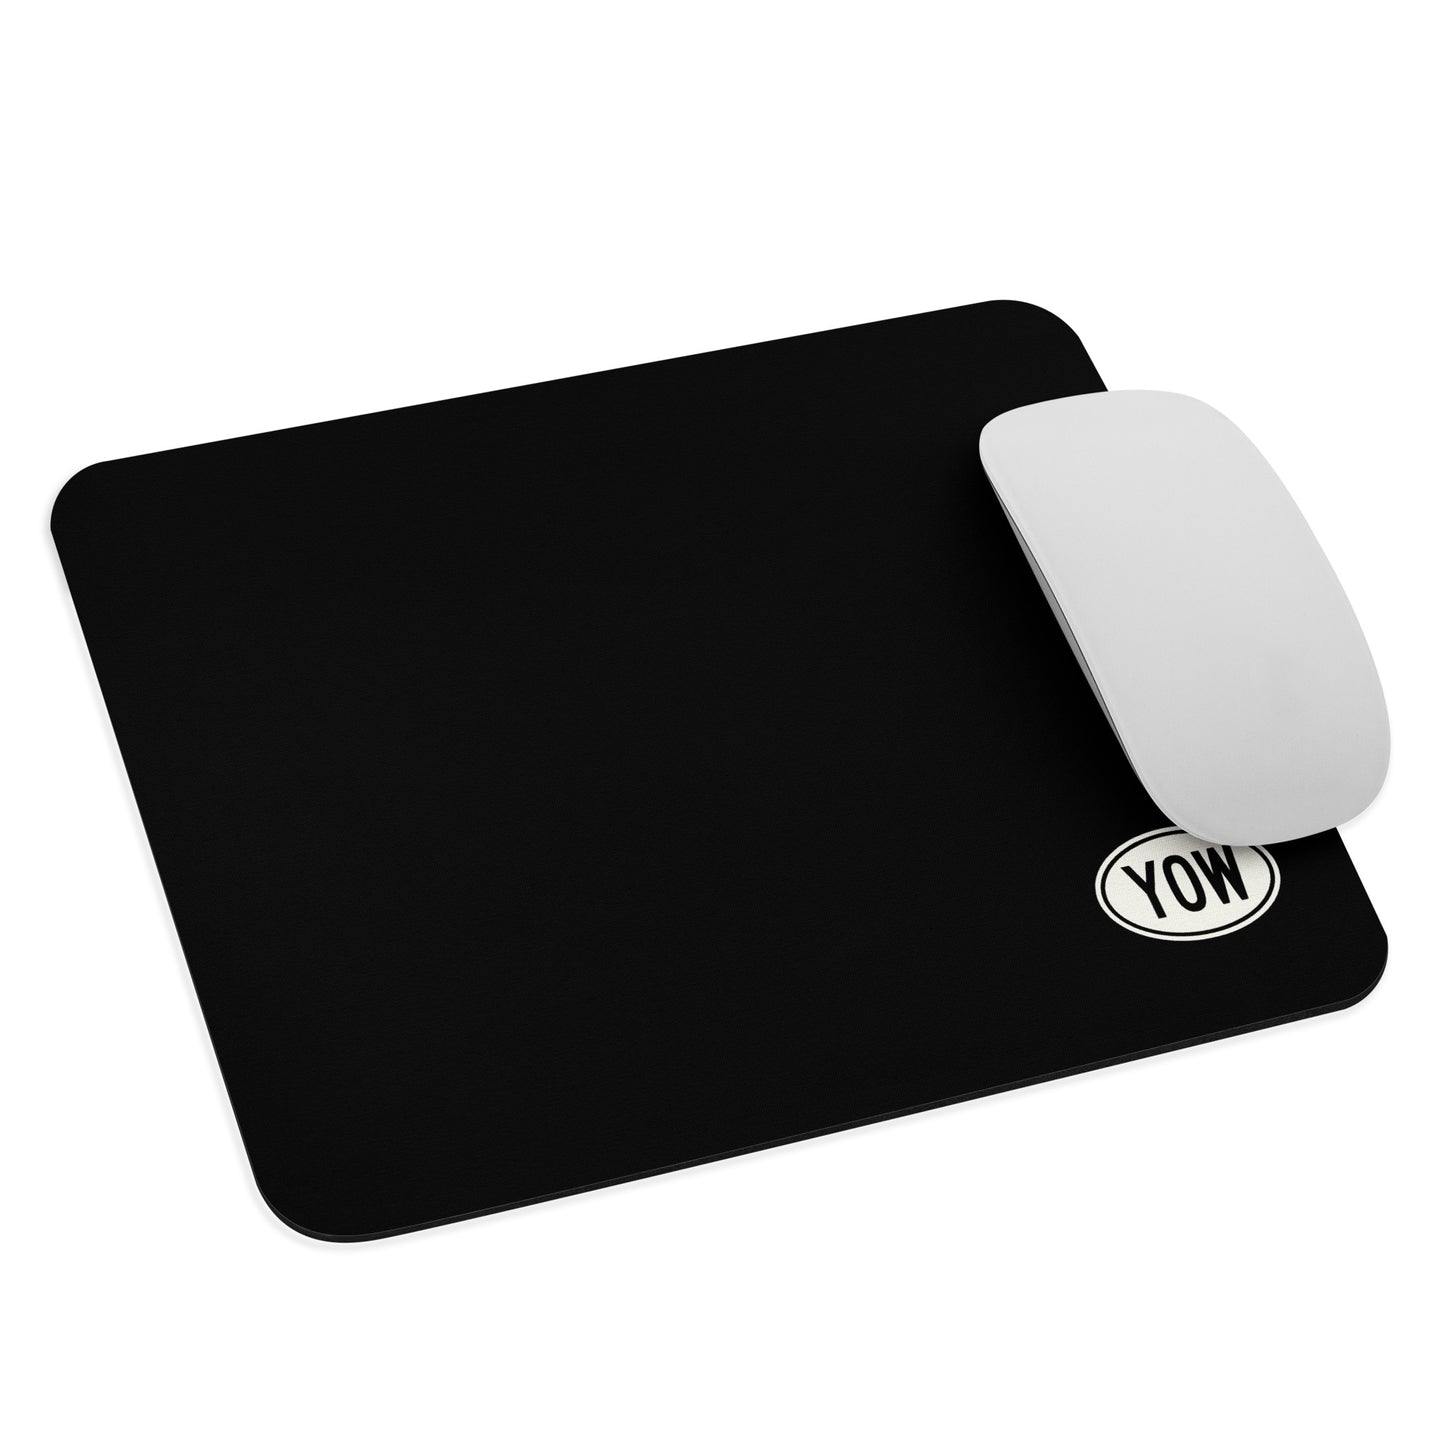 Unique Travel Gift Mouse Pad - White Oval • YOW Ottawa • YHM Designs - Image 03